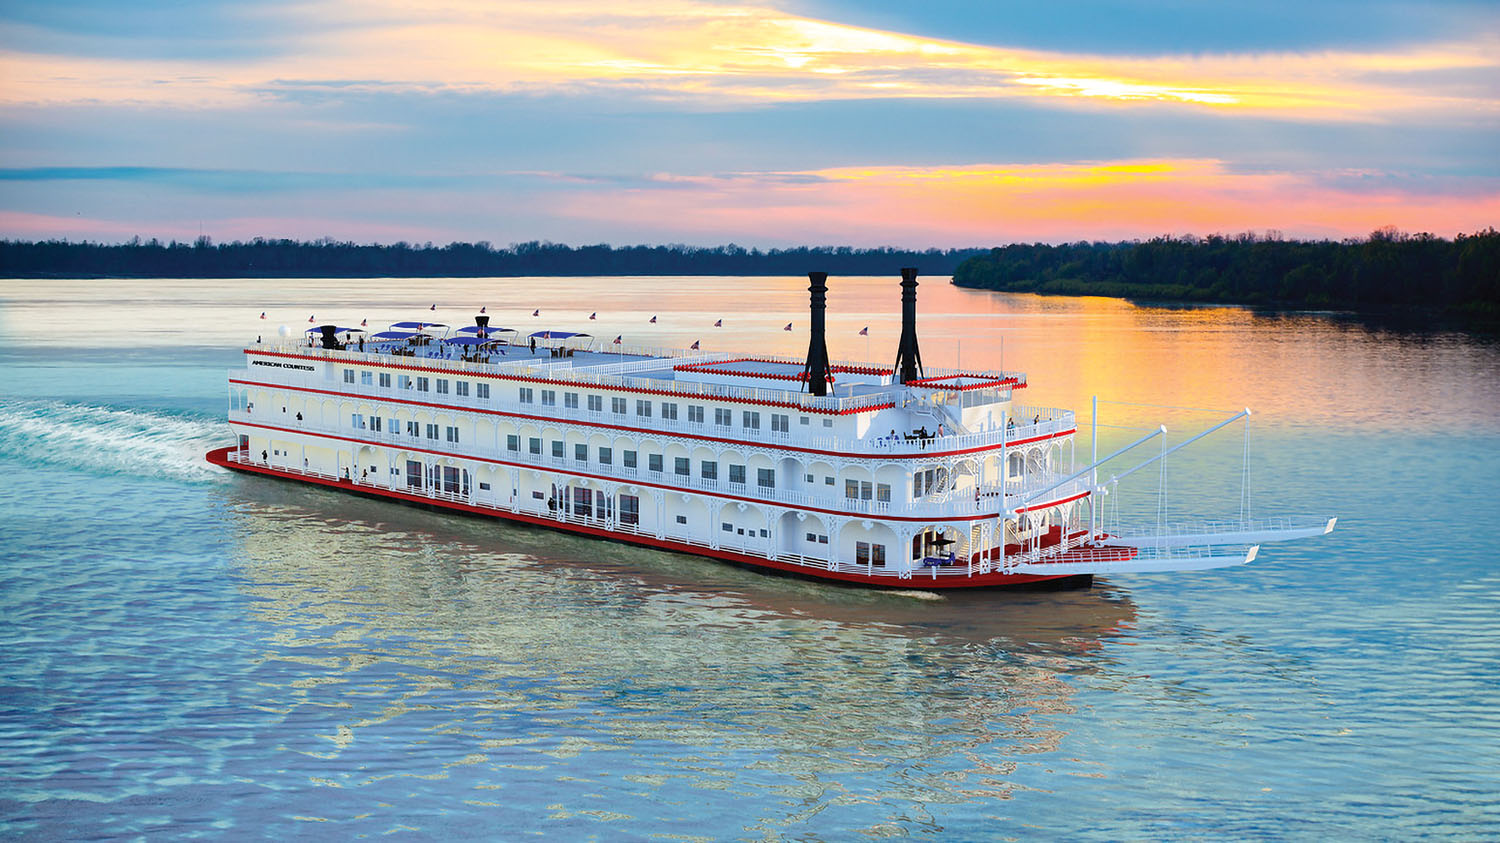 Artist's rendering of the American Countess riverboat.